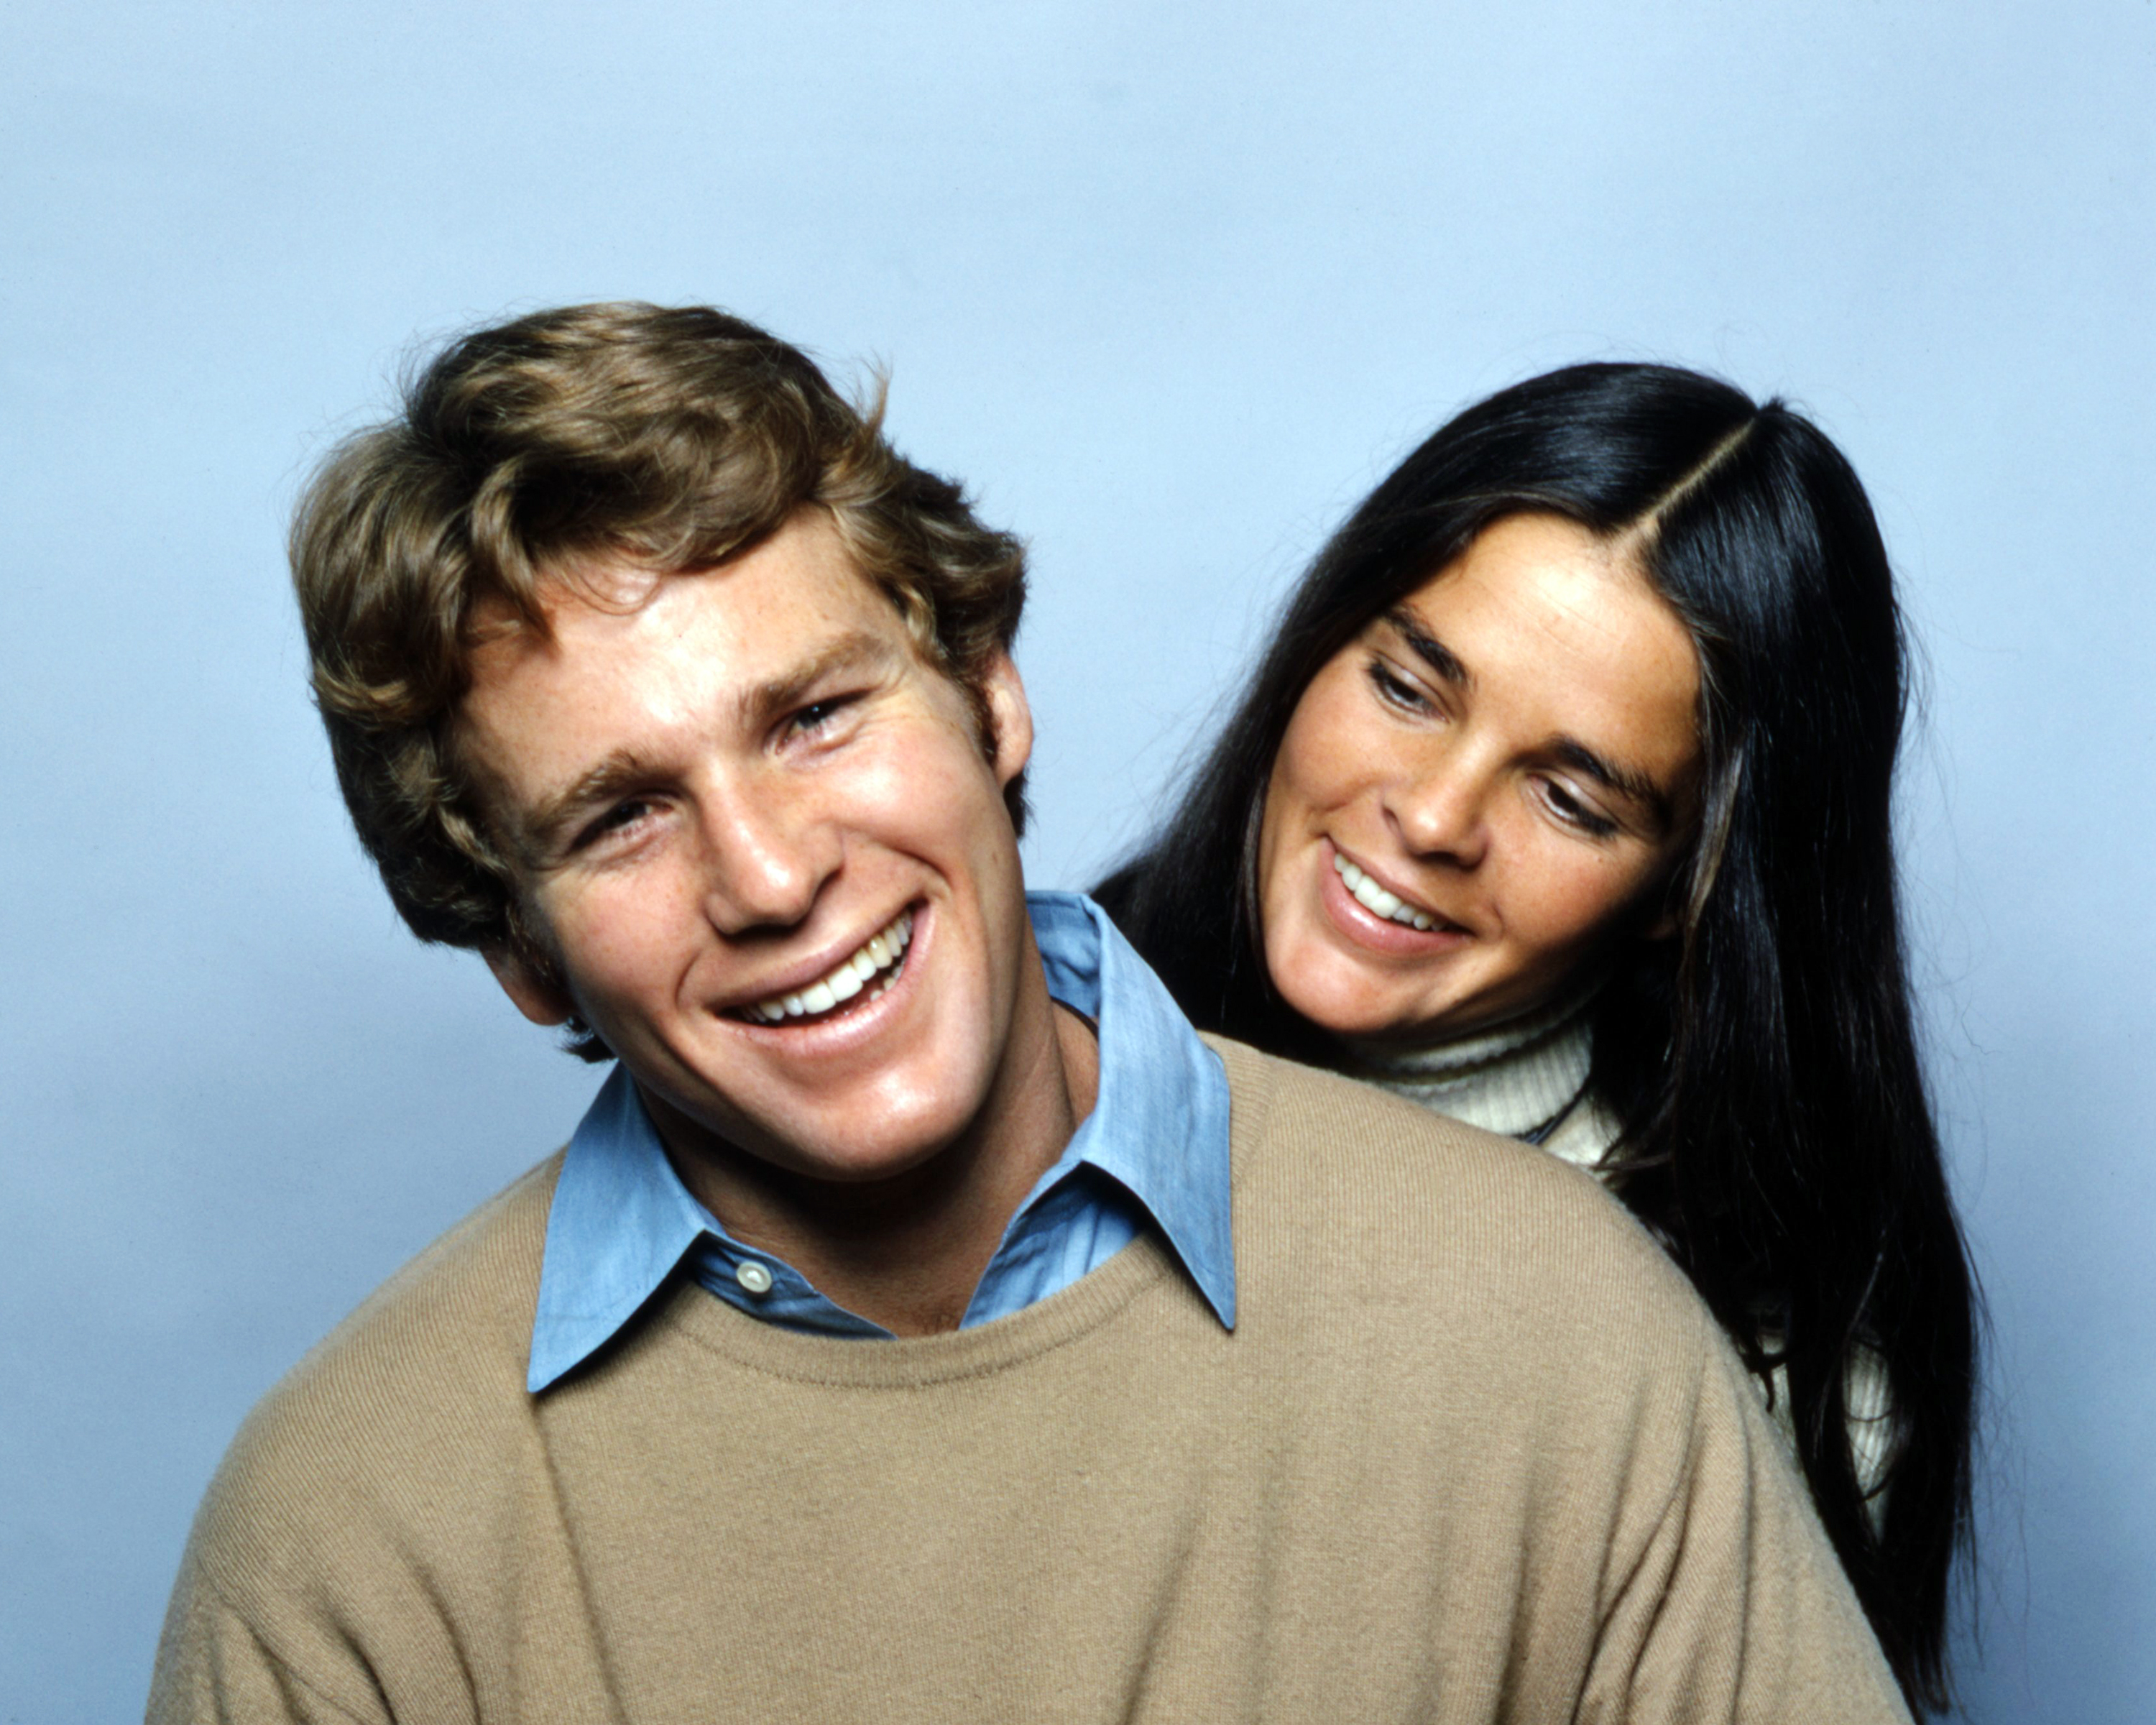 Ryan O'Neal and Ali MacGraw in a promotional still for "Love Story," circa 1970 | Source: Getty Images